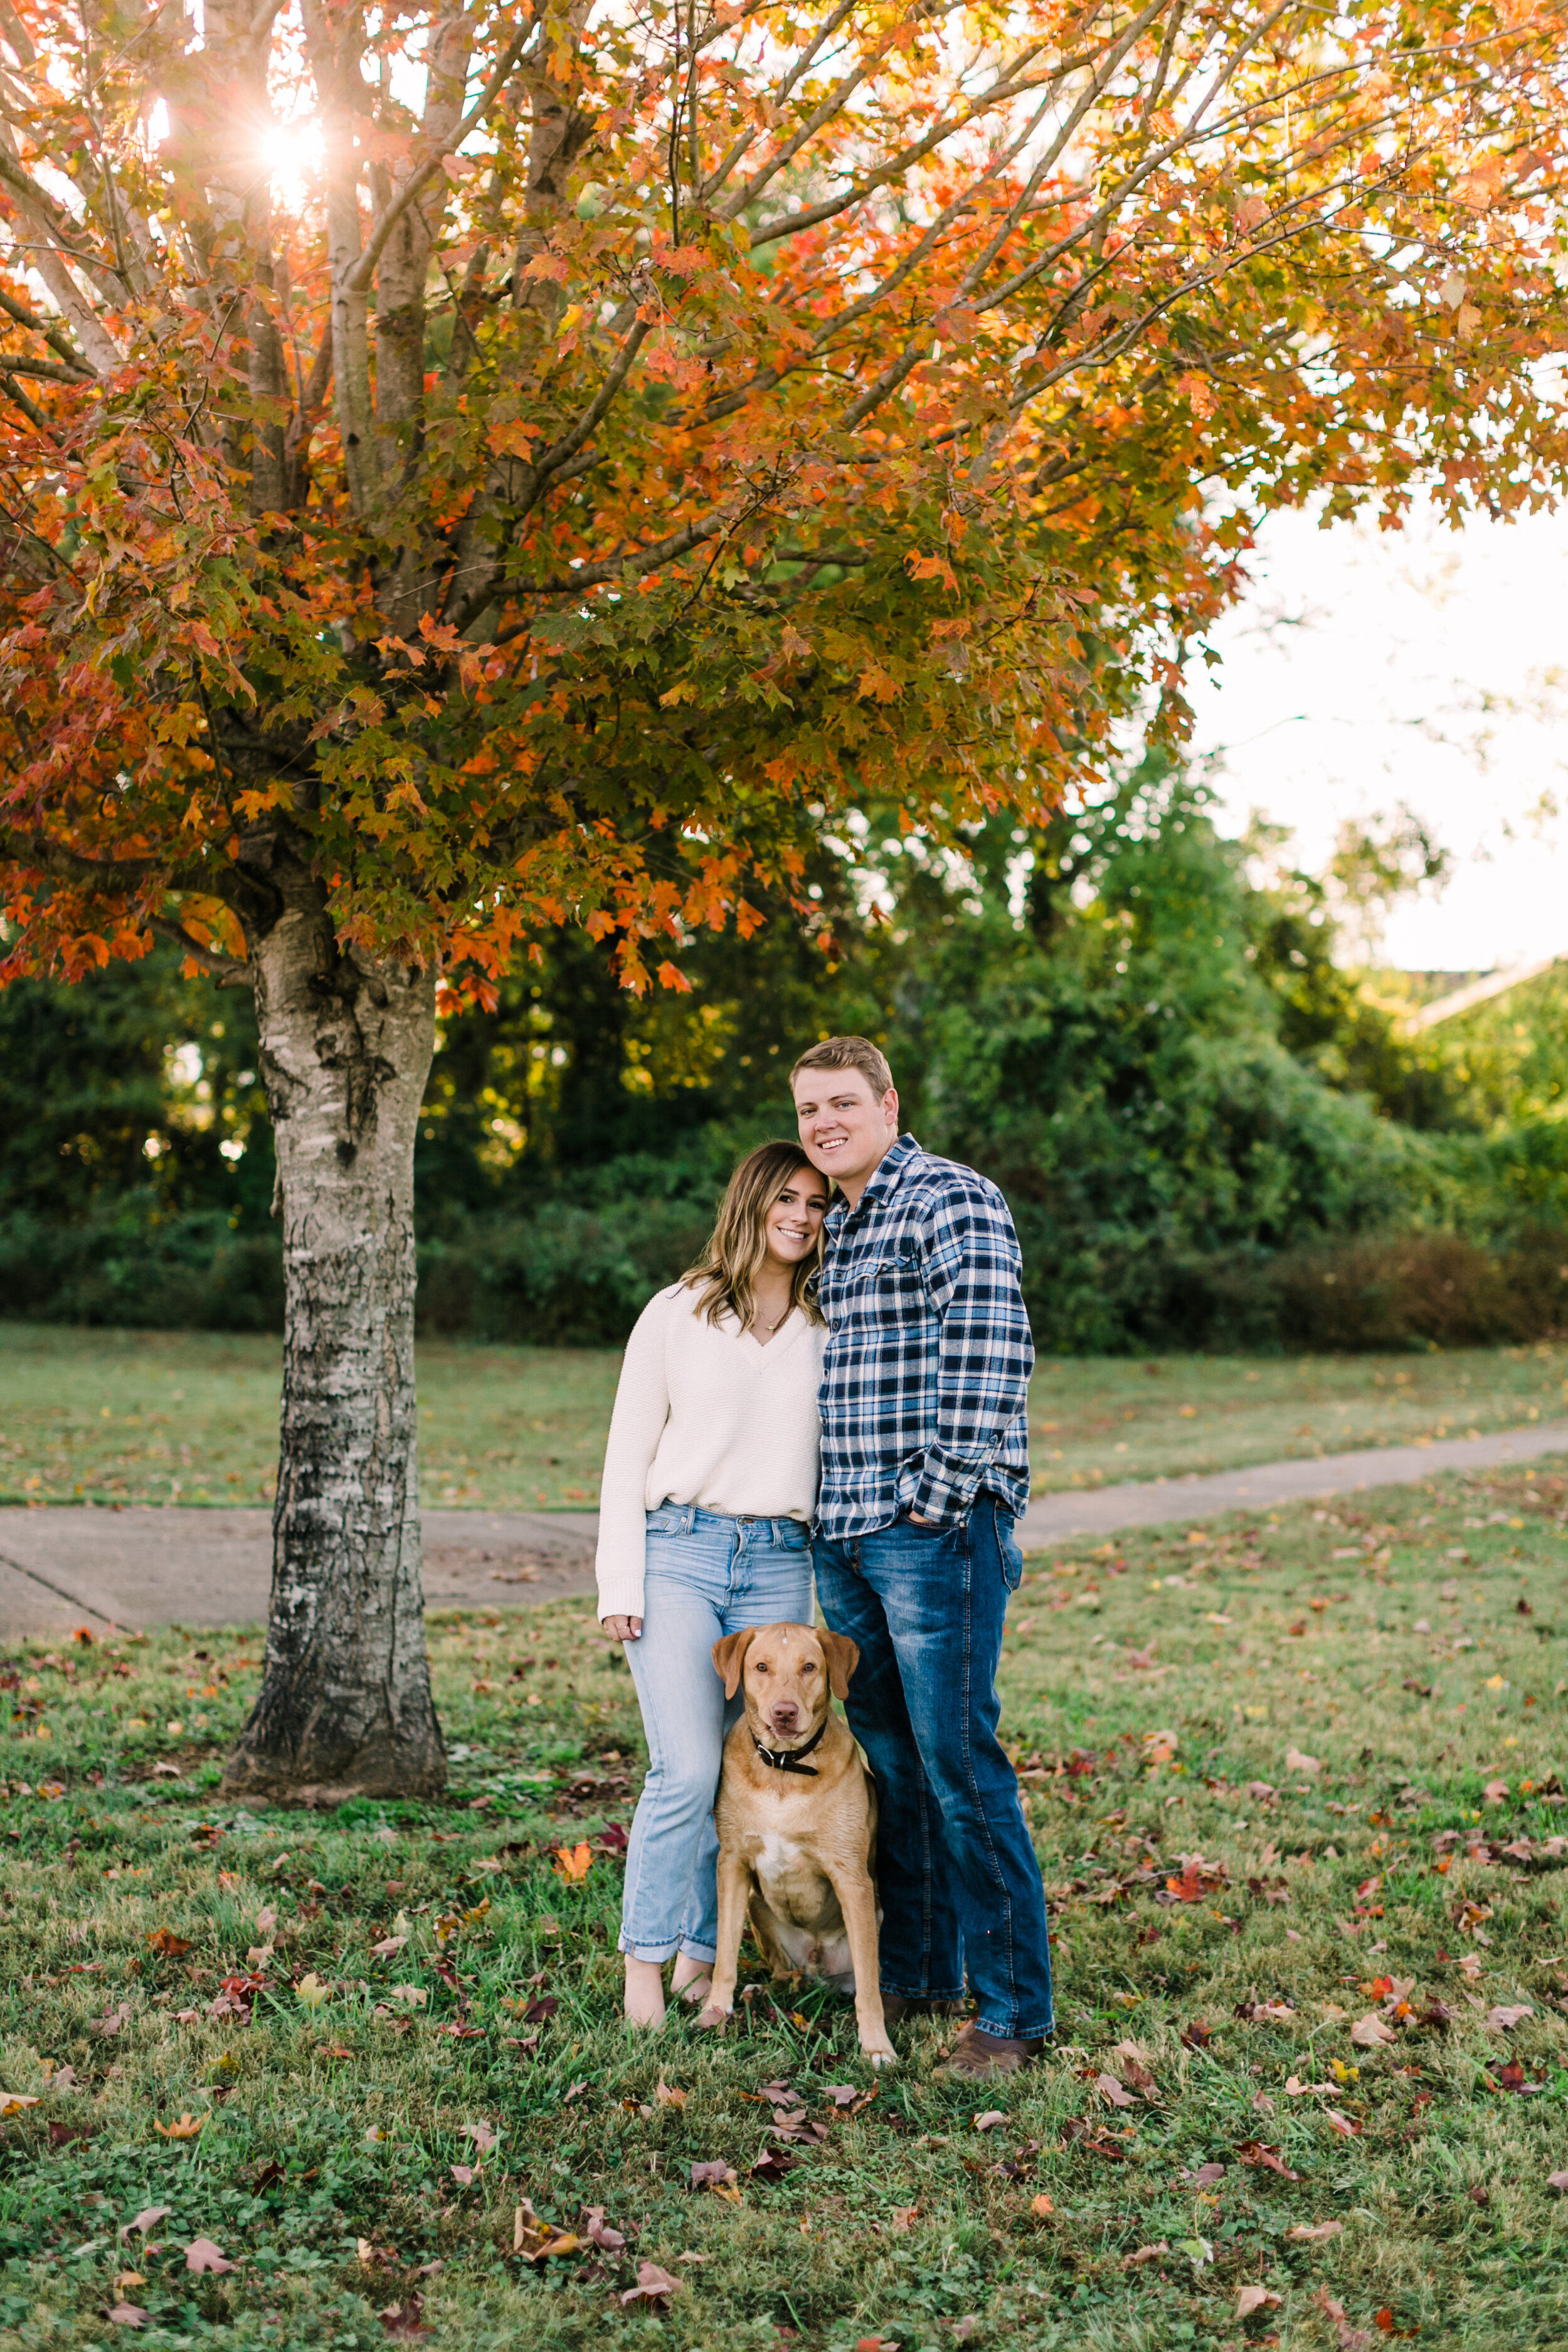 Tennessee+Fall+Engagement+Photos+Puppy (16 of 63).jpg